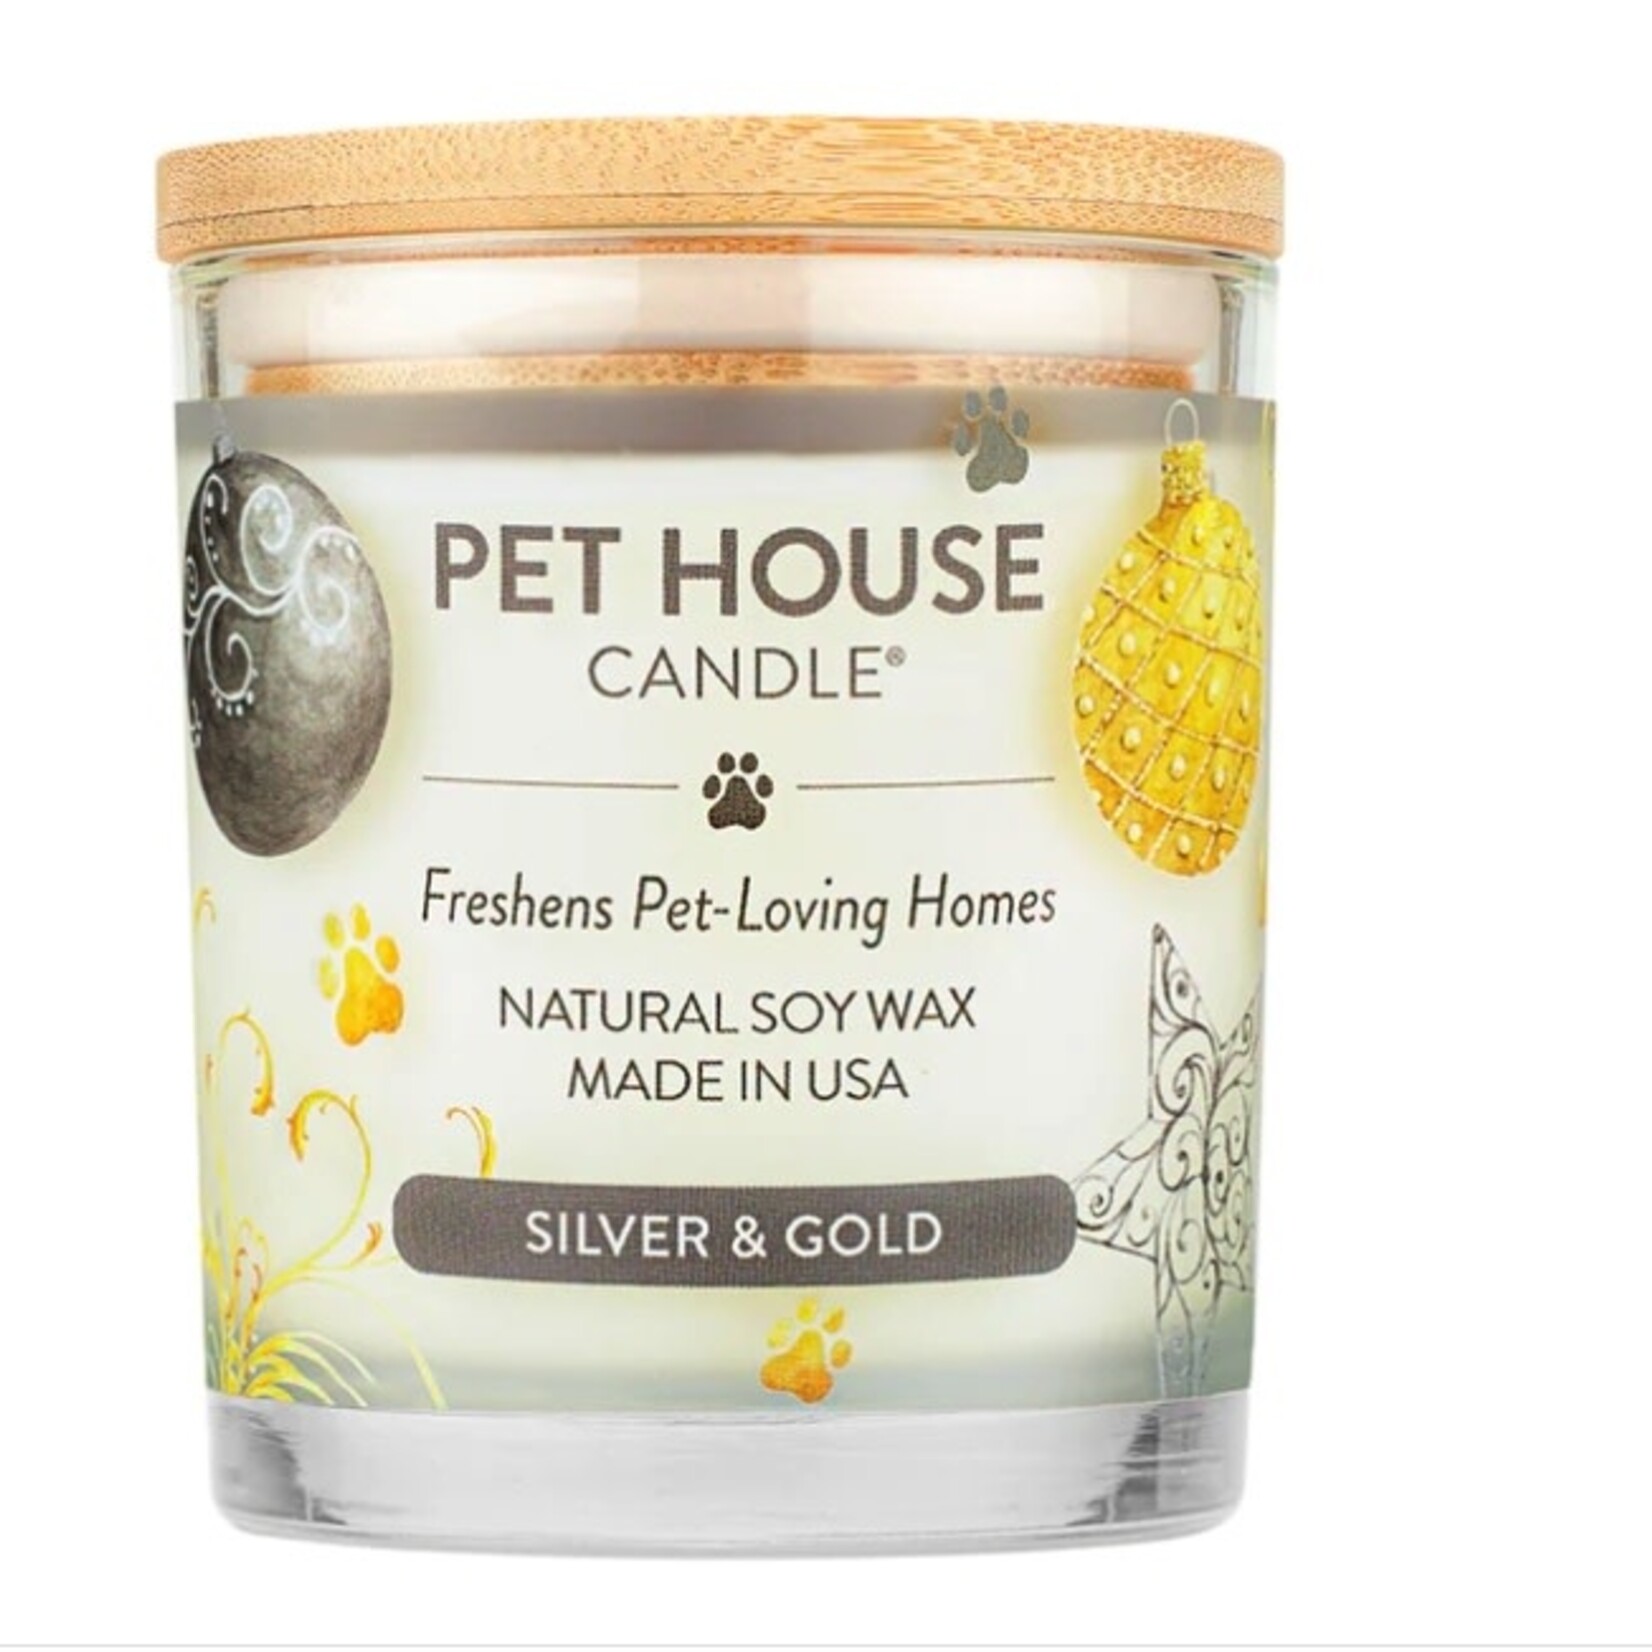 PET HOUSE CANDLE Pet House Candle Silver & Gold